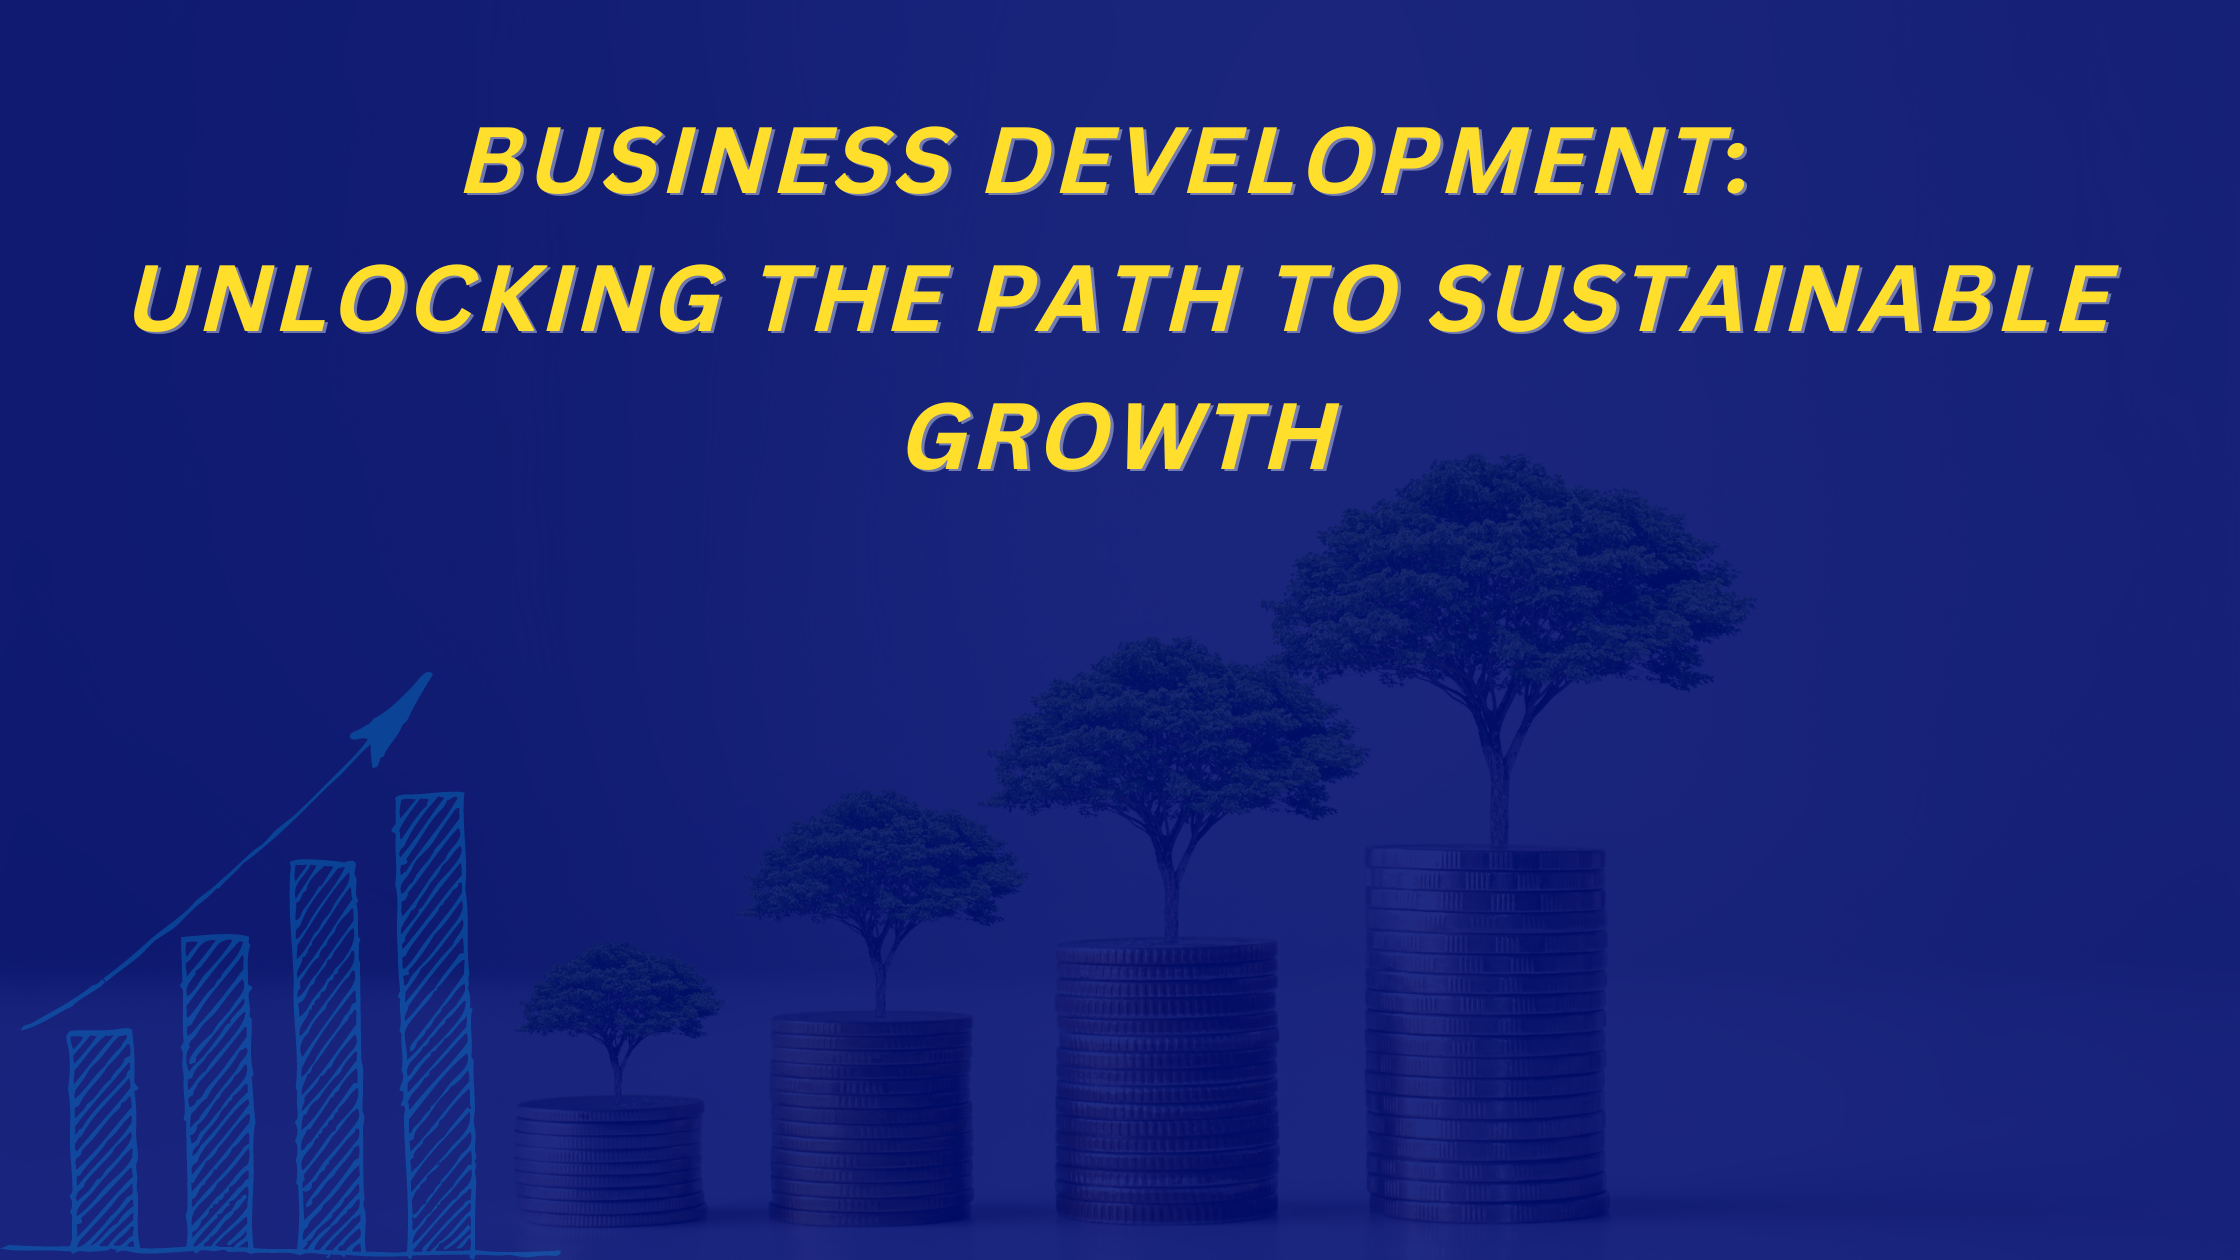 Business Development: Unlocking the Path to Sustainable Growth